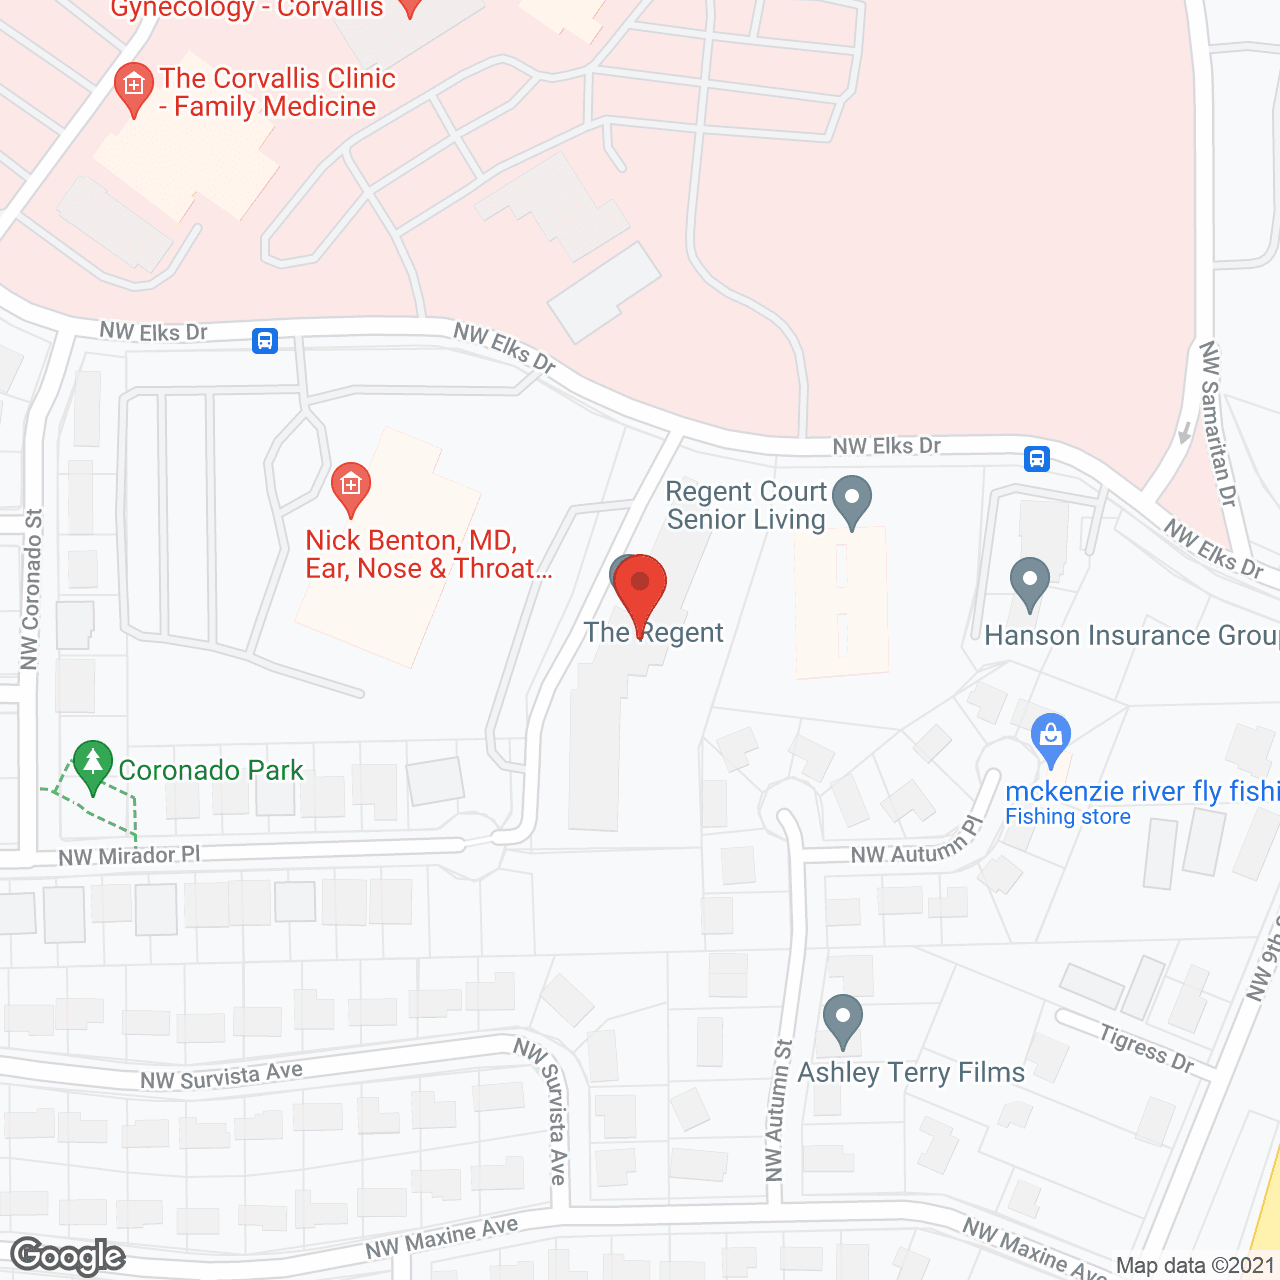 Holiday Regent in google map